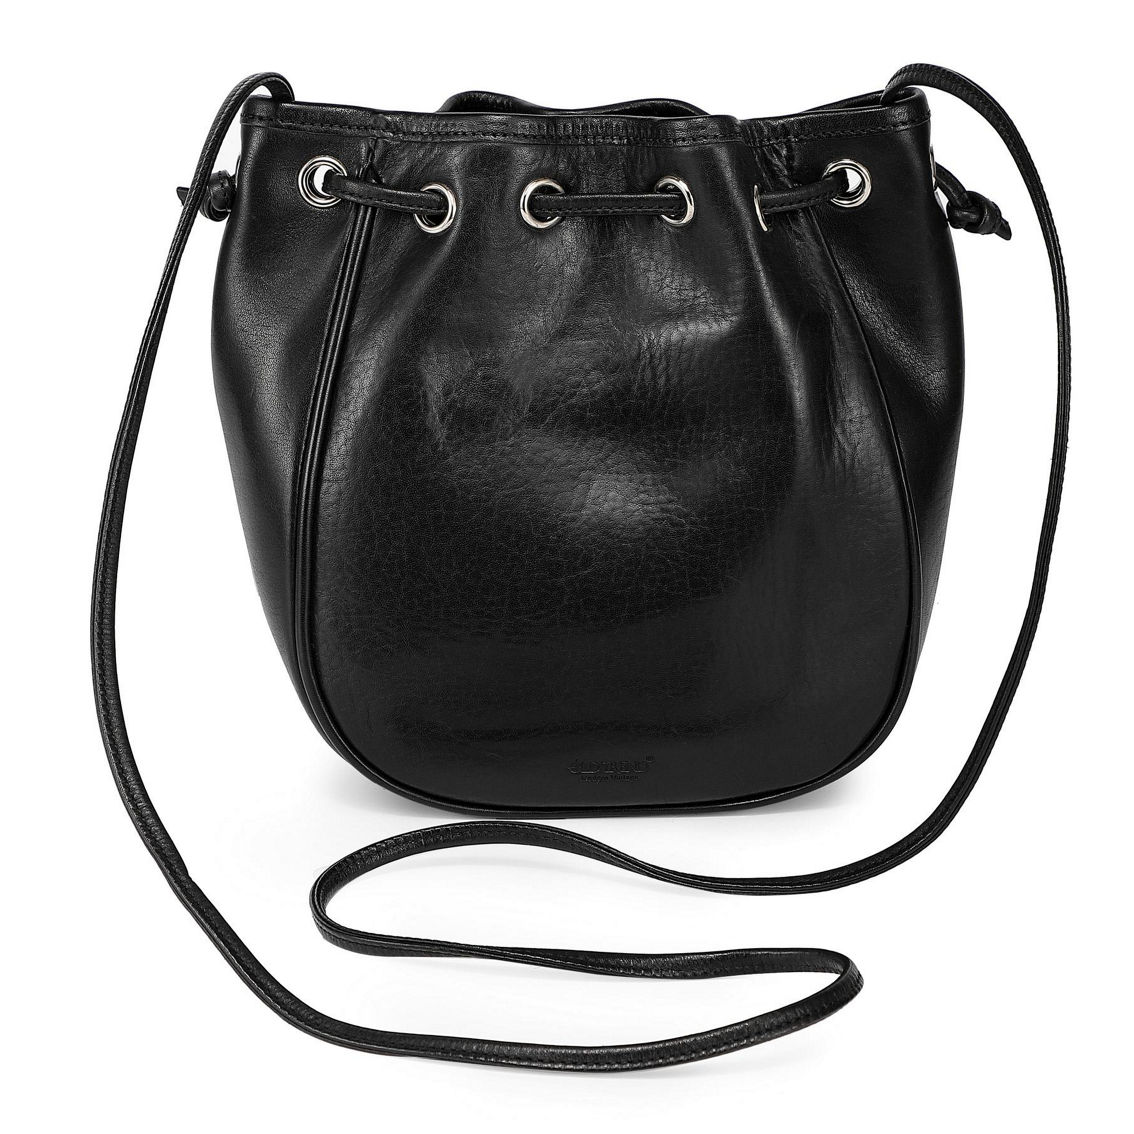 Old Trend Snapper Convertible Bucket Leather Crossbody - Image 5 of 5